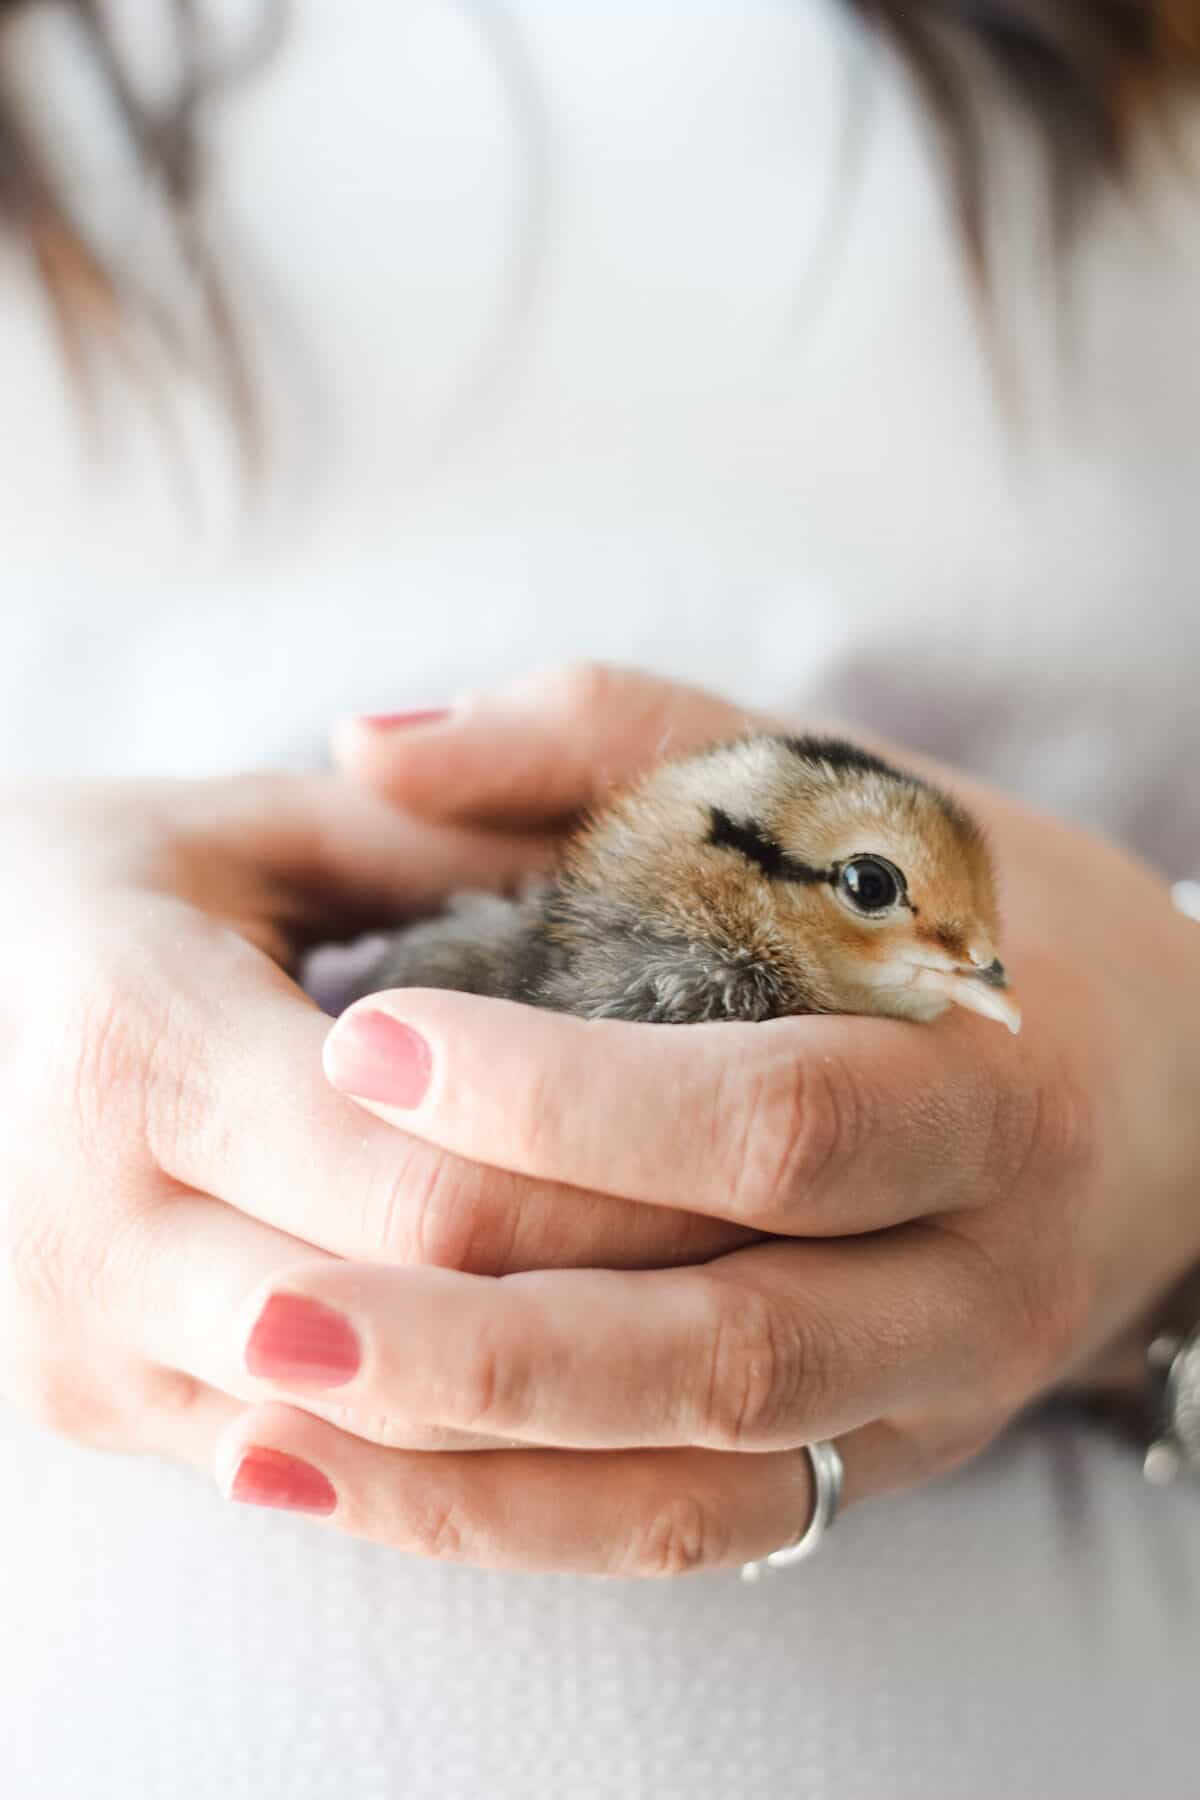 Mary holding a chick in hands.